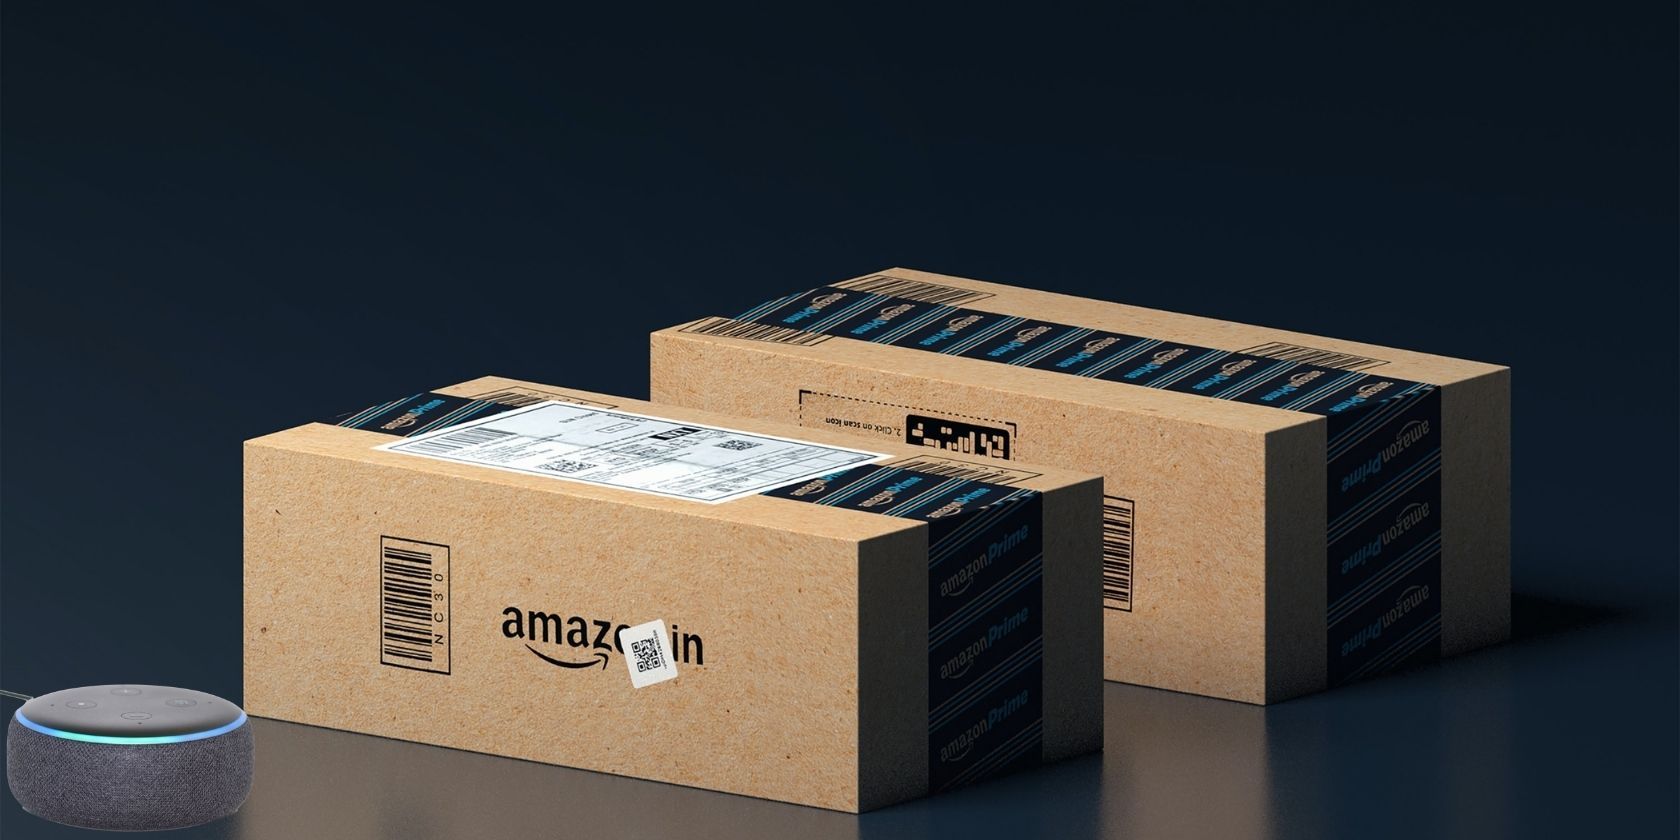 amazon packages near a amazon echo